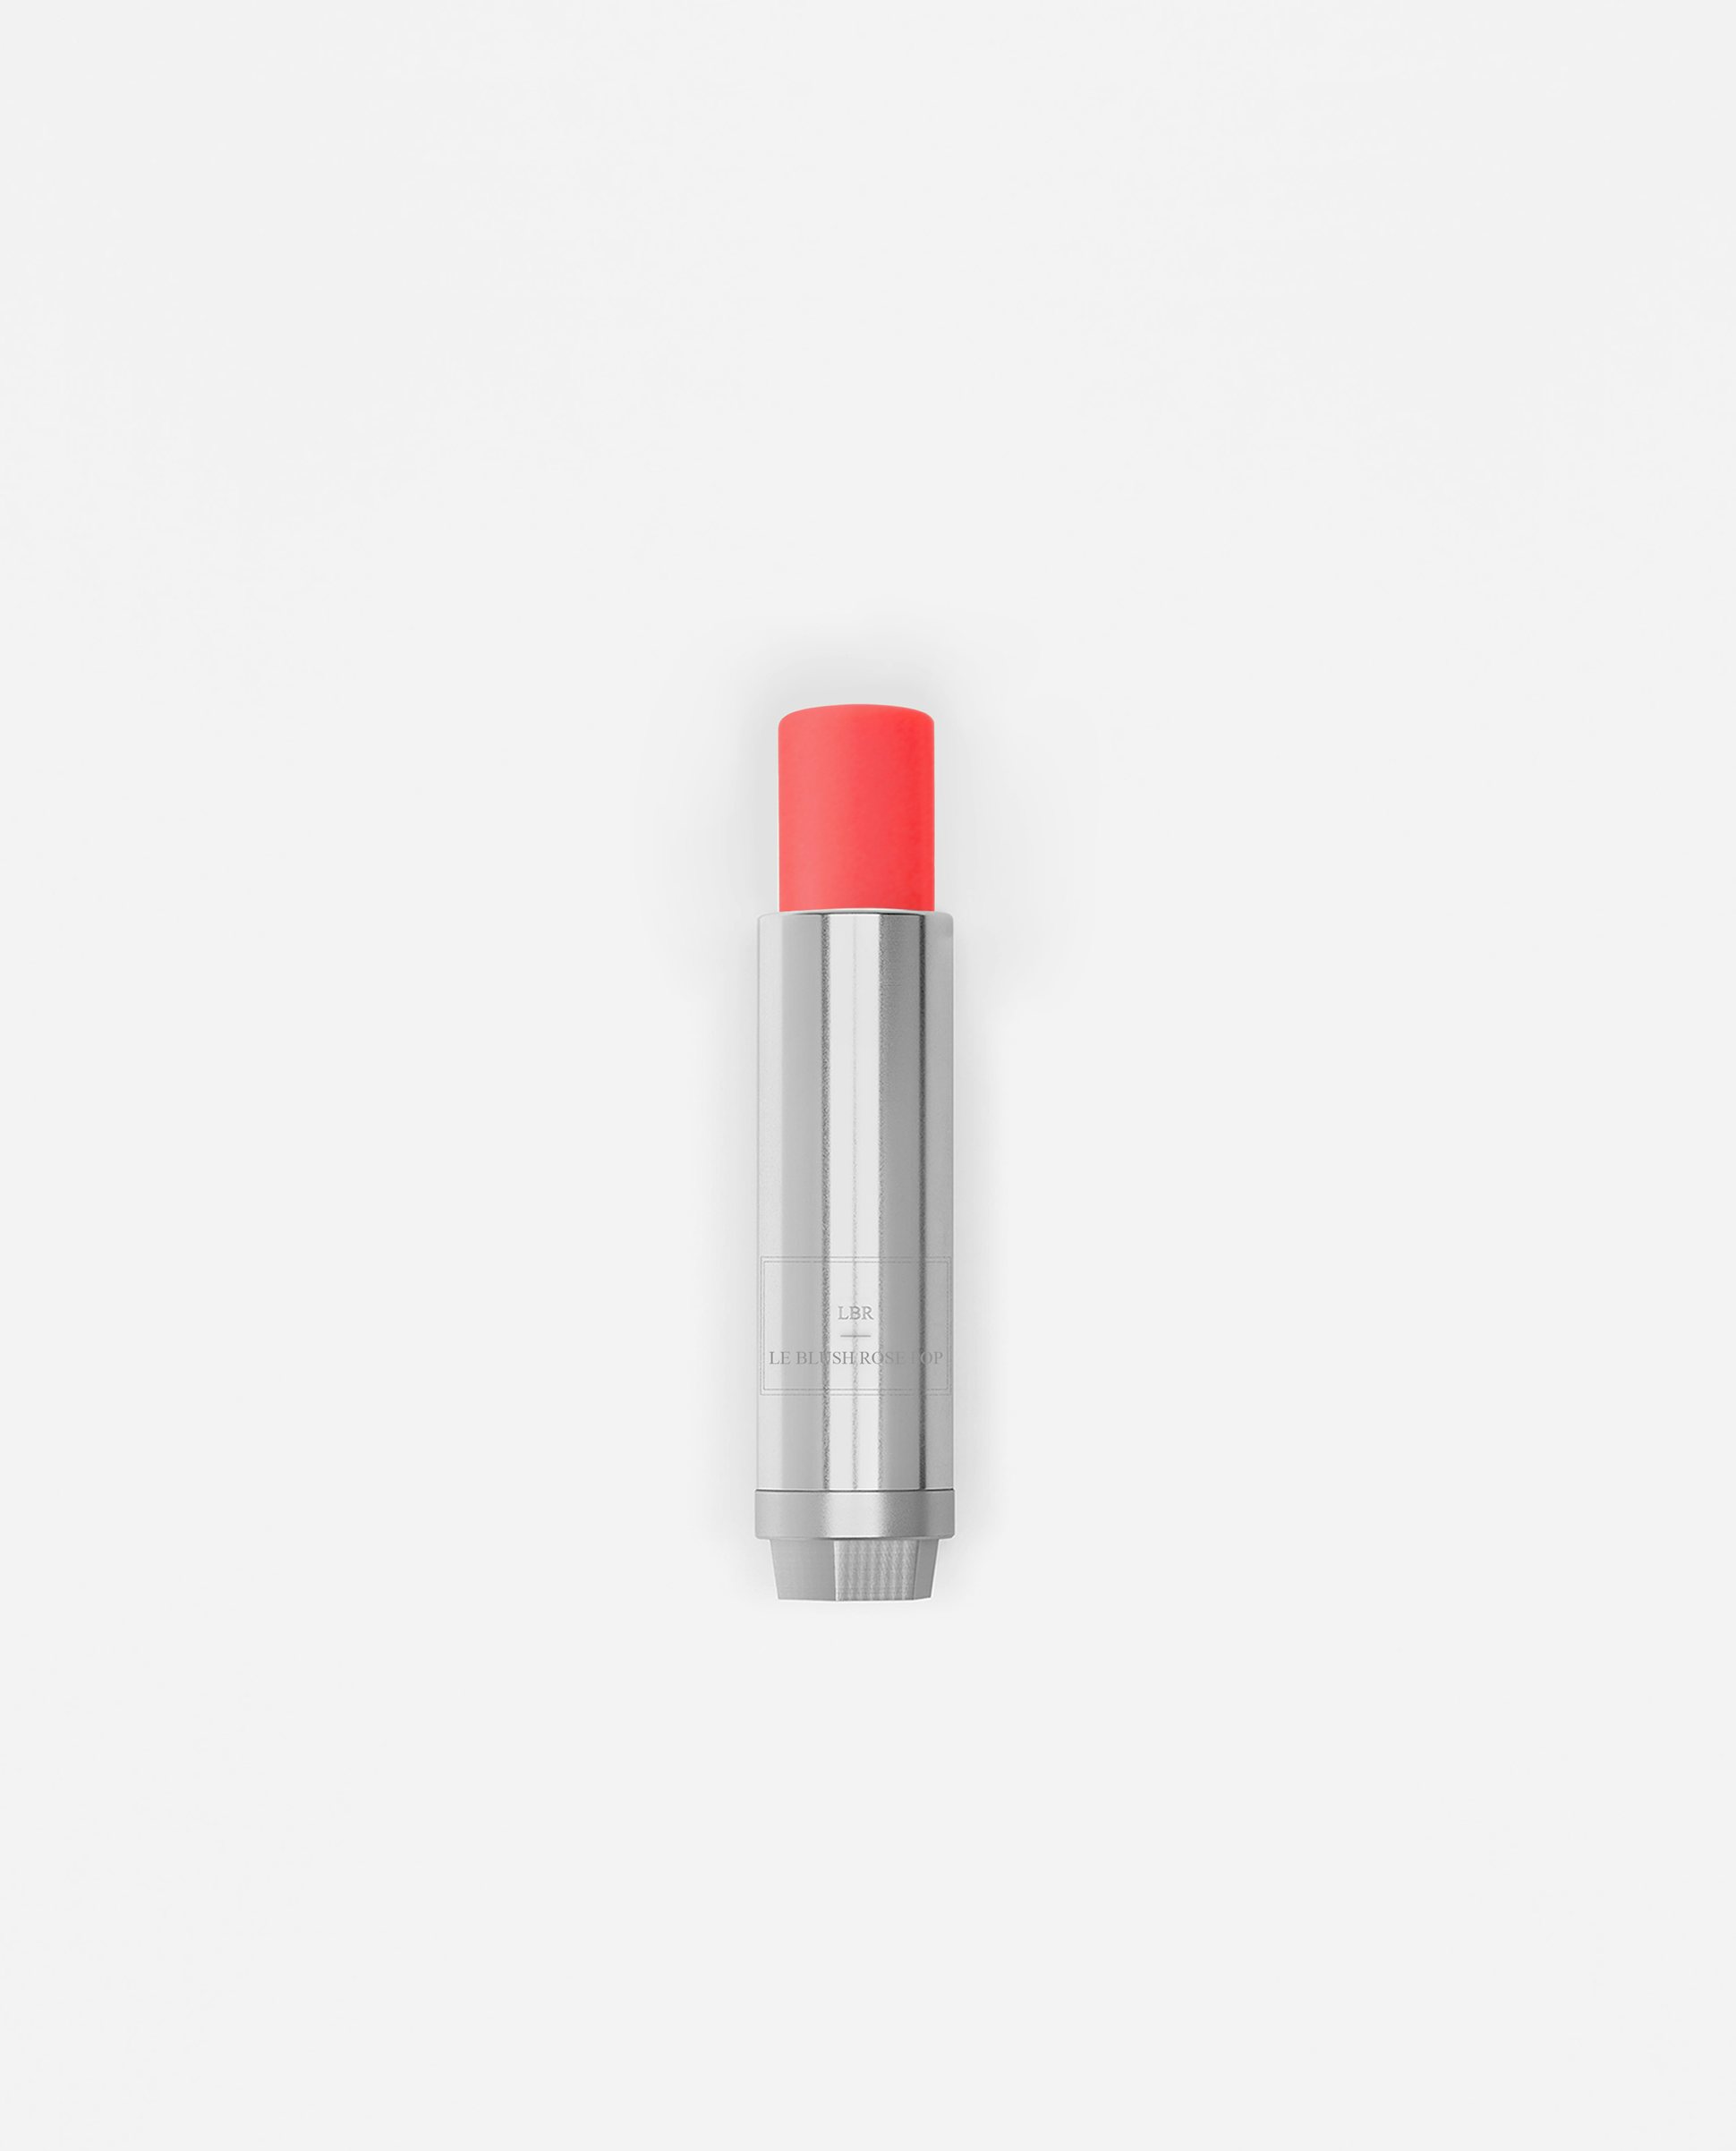 La bouche rouge The Pop Pink Blush in metal refill